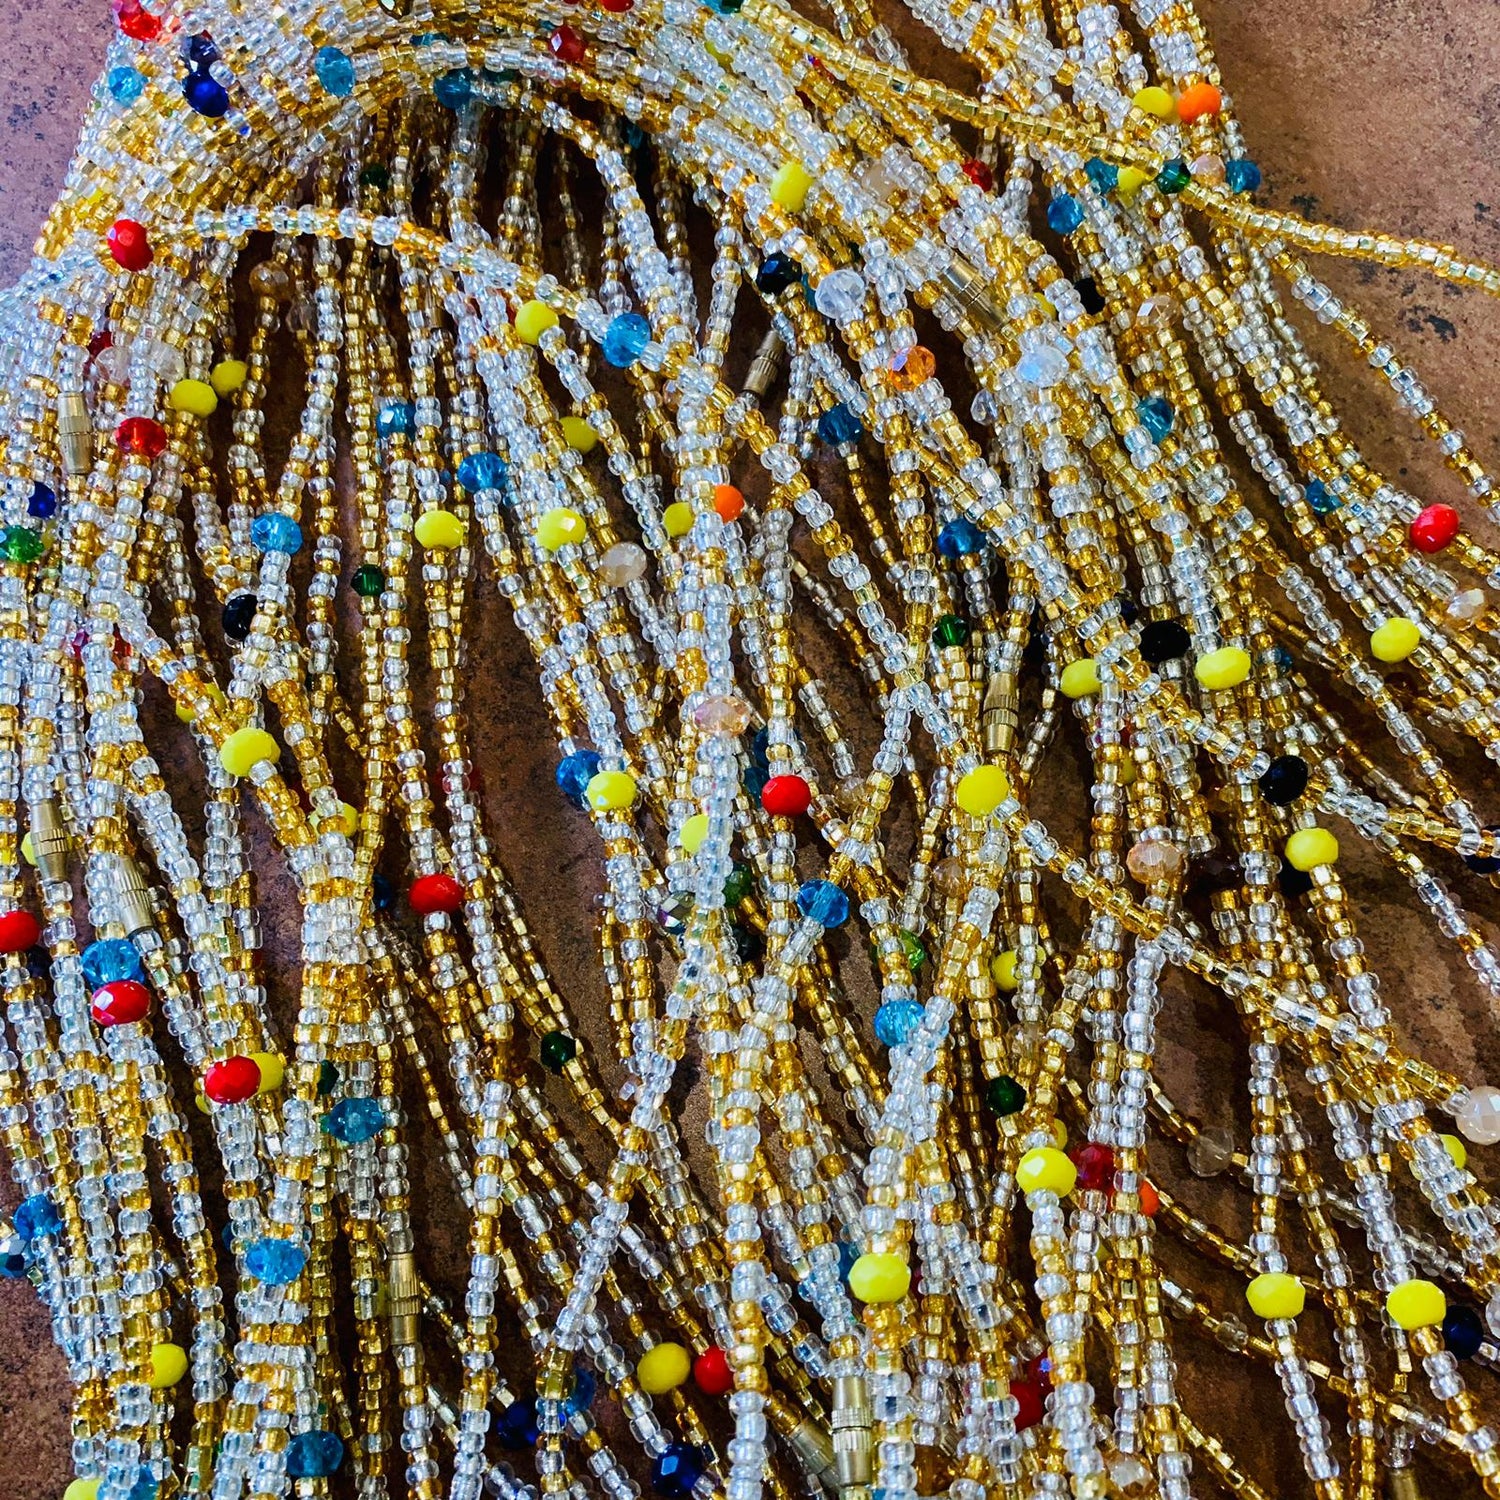 47 Inches Gold And Silver Beads With Yellow, Red And Blue Pebble Bar Removable Screw Waist Beads 